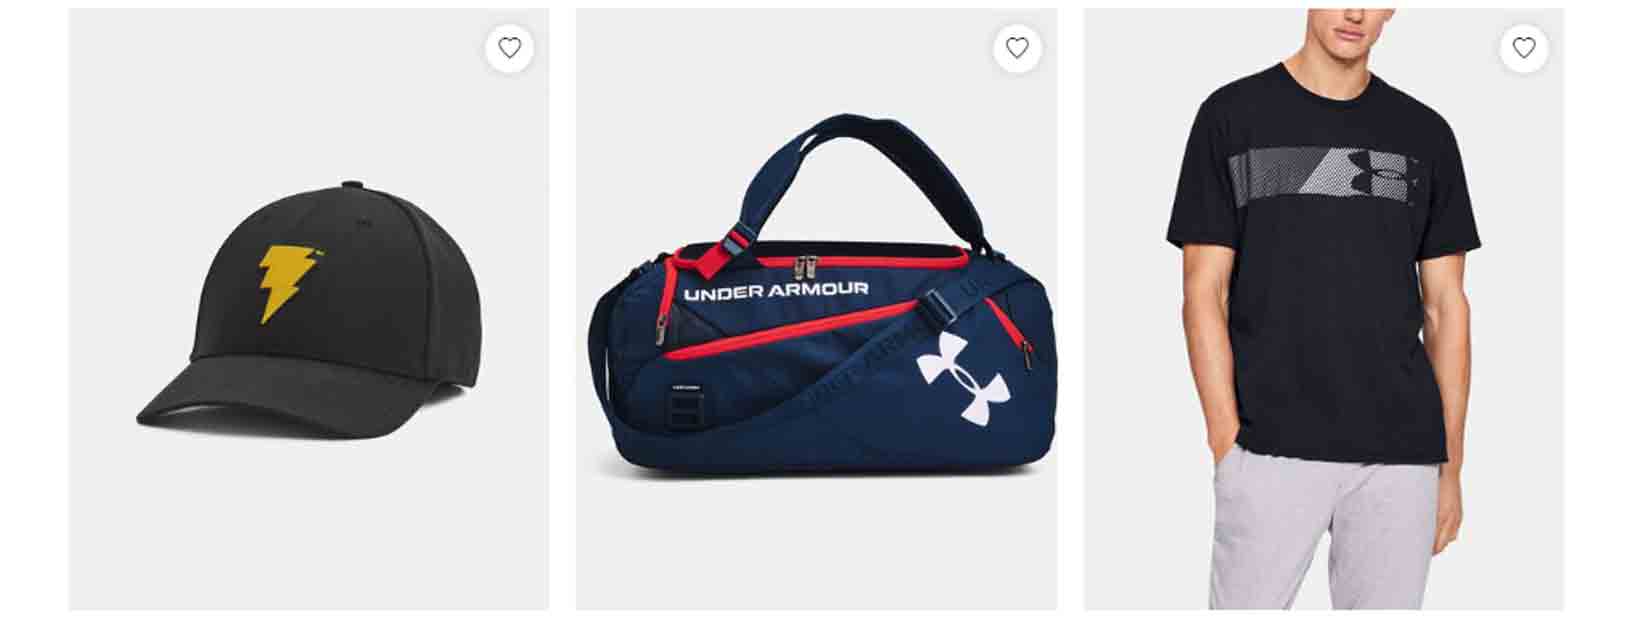 Under Armour Sports Goods